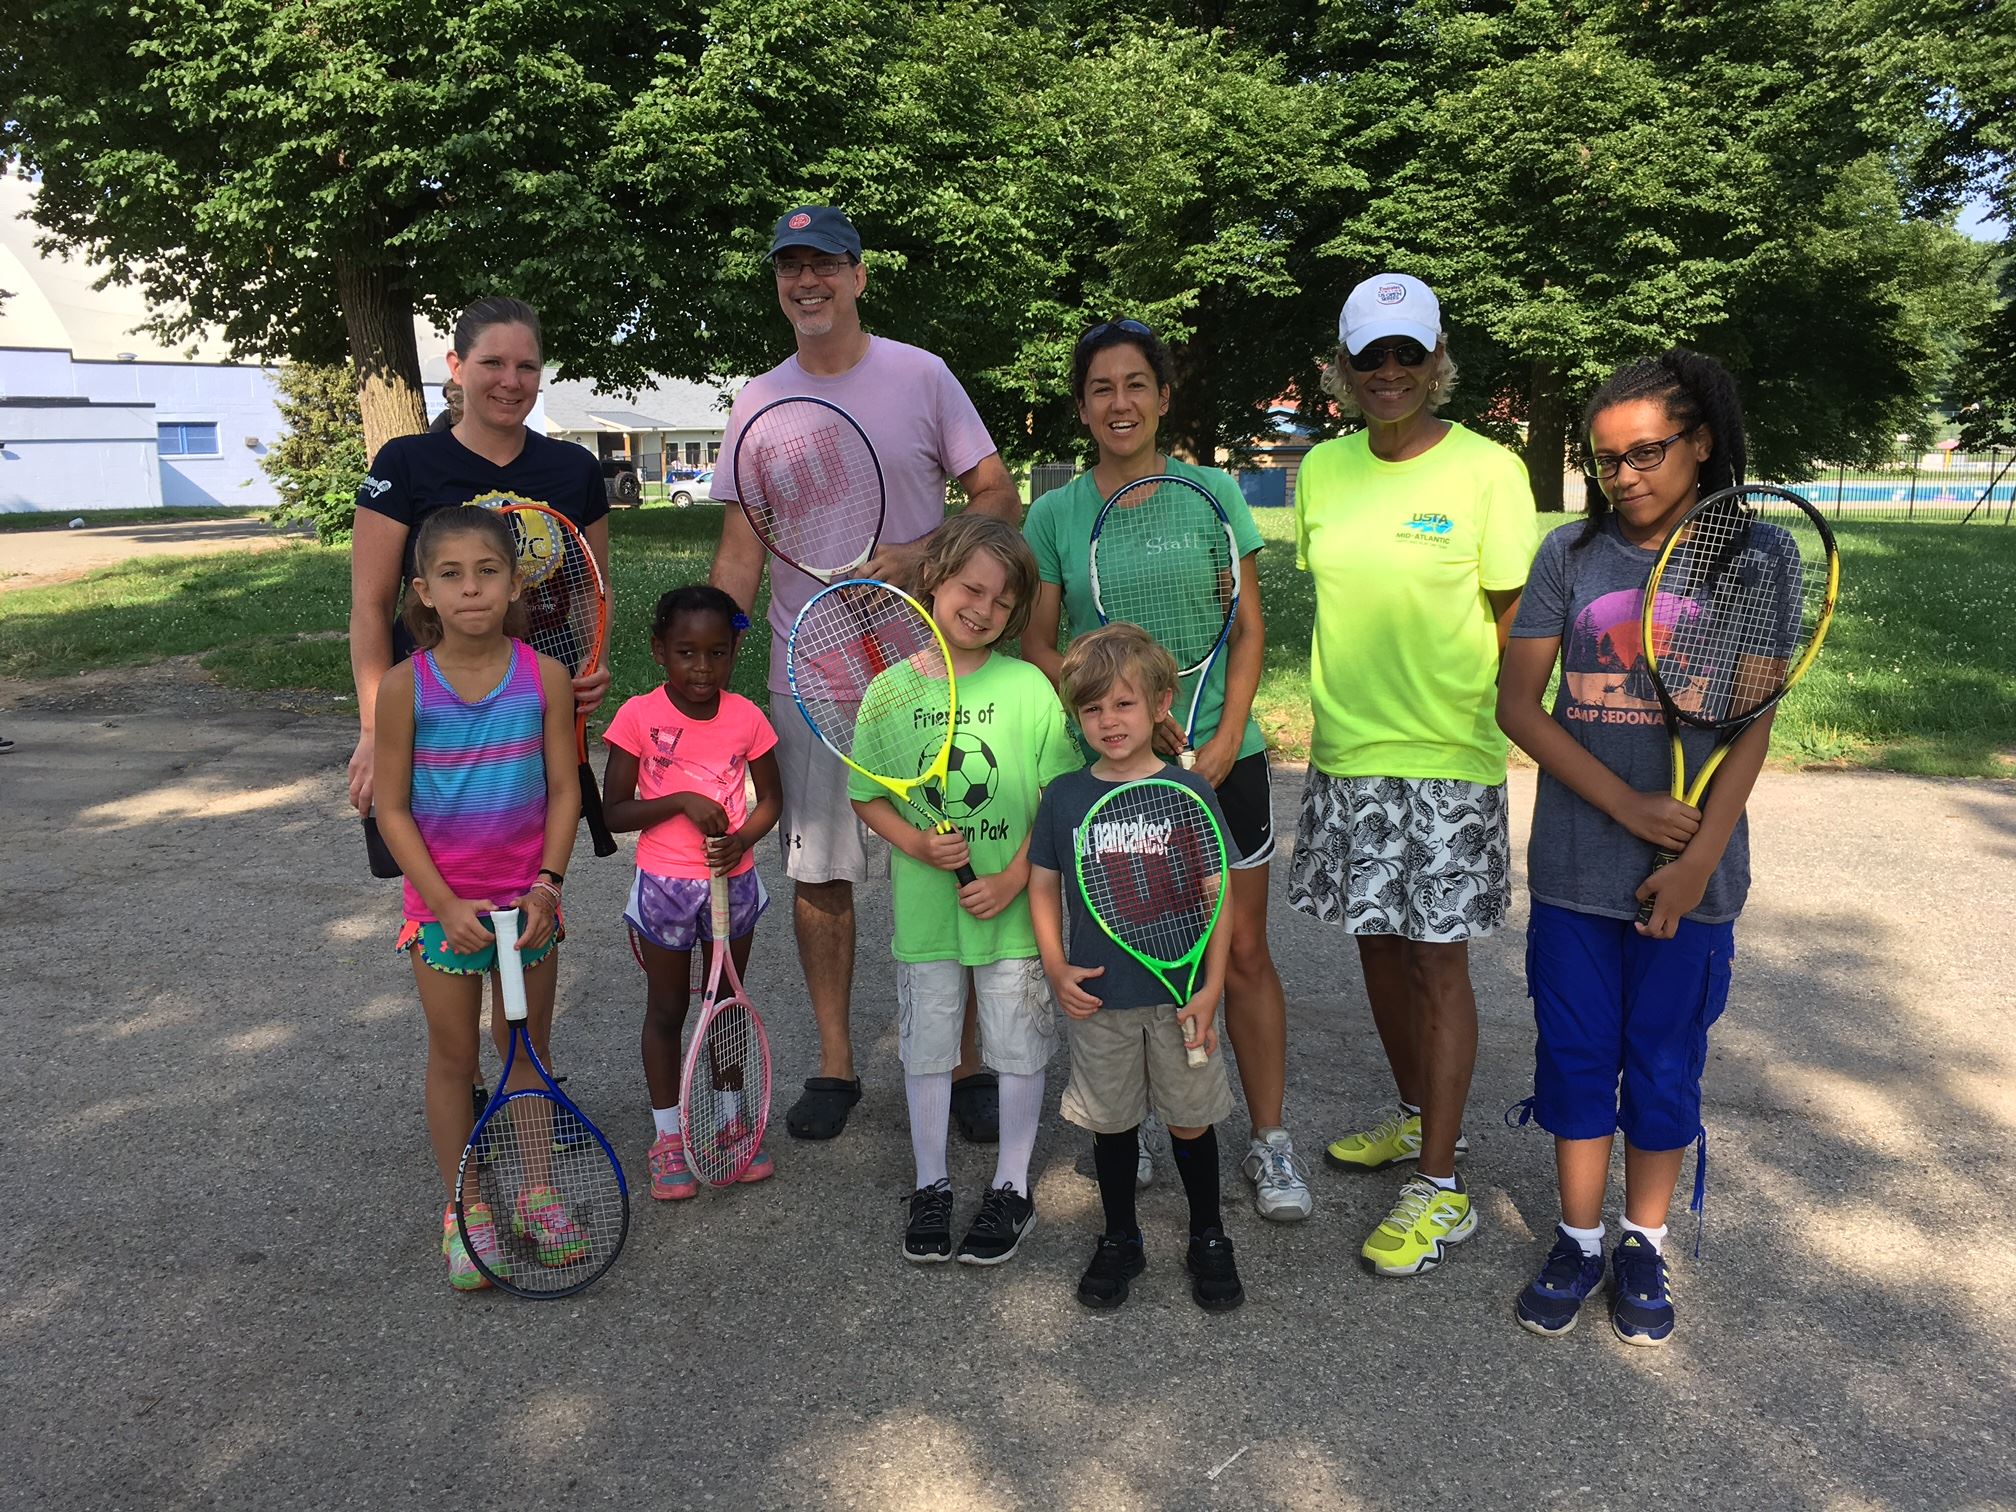  We provide FREE Zumba, exercise groups, tennis and soccer clinics, and with your support, can work on new opportunities for fitness in the park! 